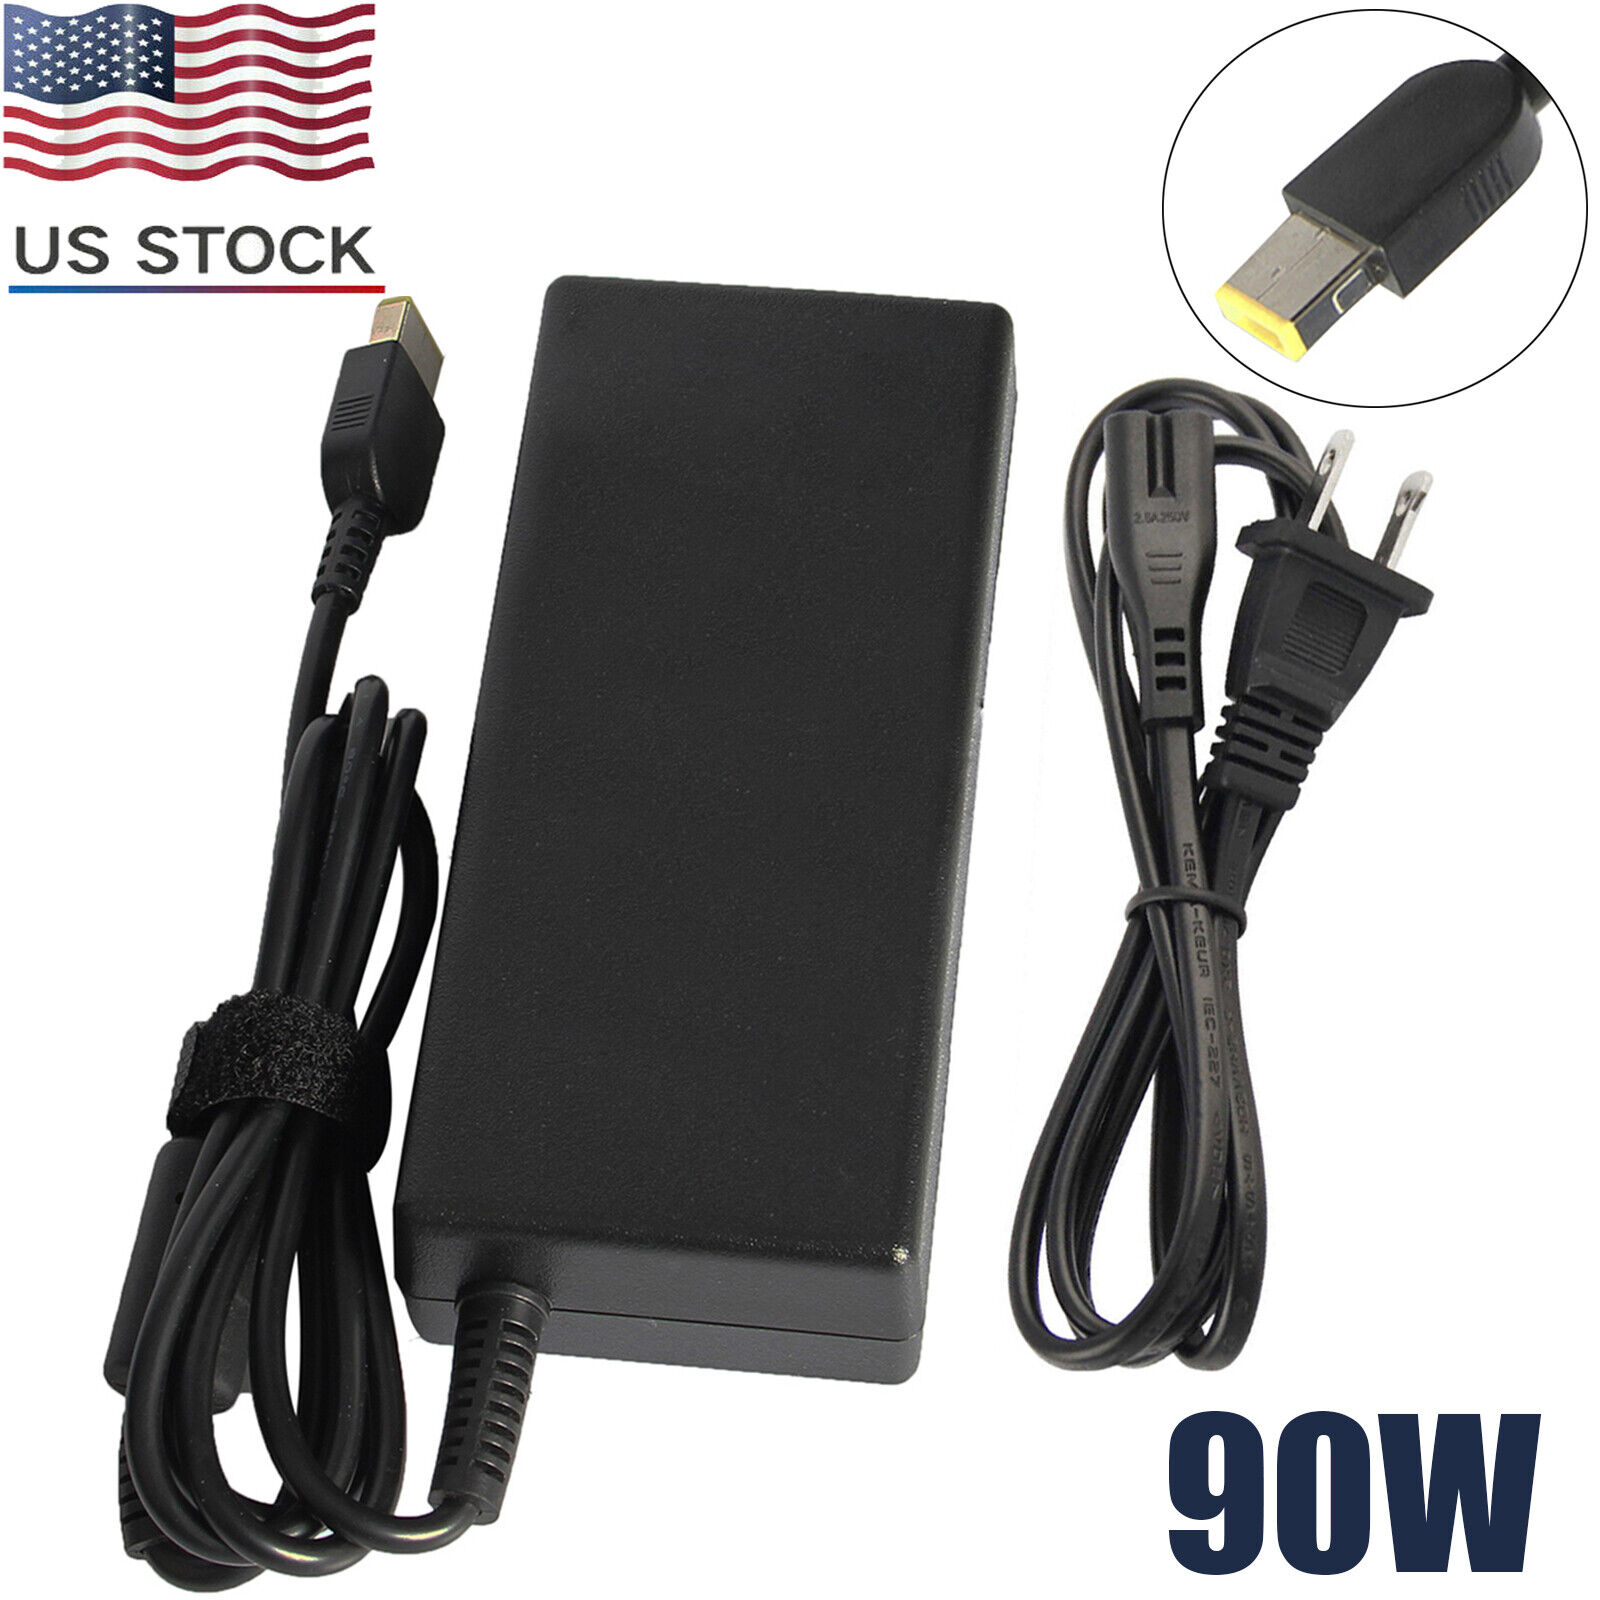 For Lenovo ThinkPad T470p T470s T540p T550 T560 AC Power Adapter Charger 90W NEW